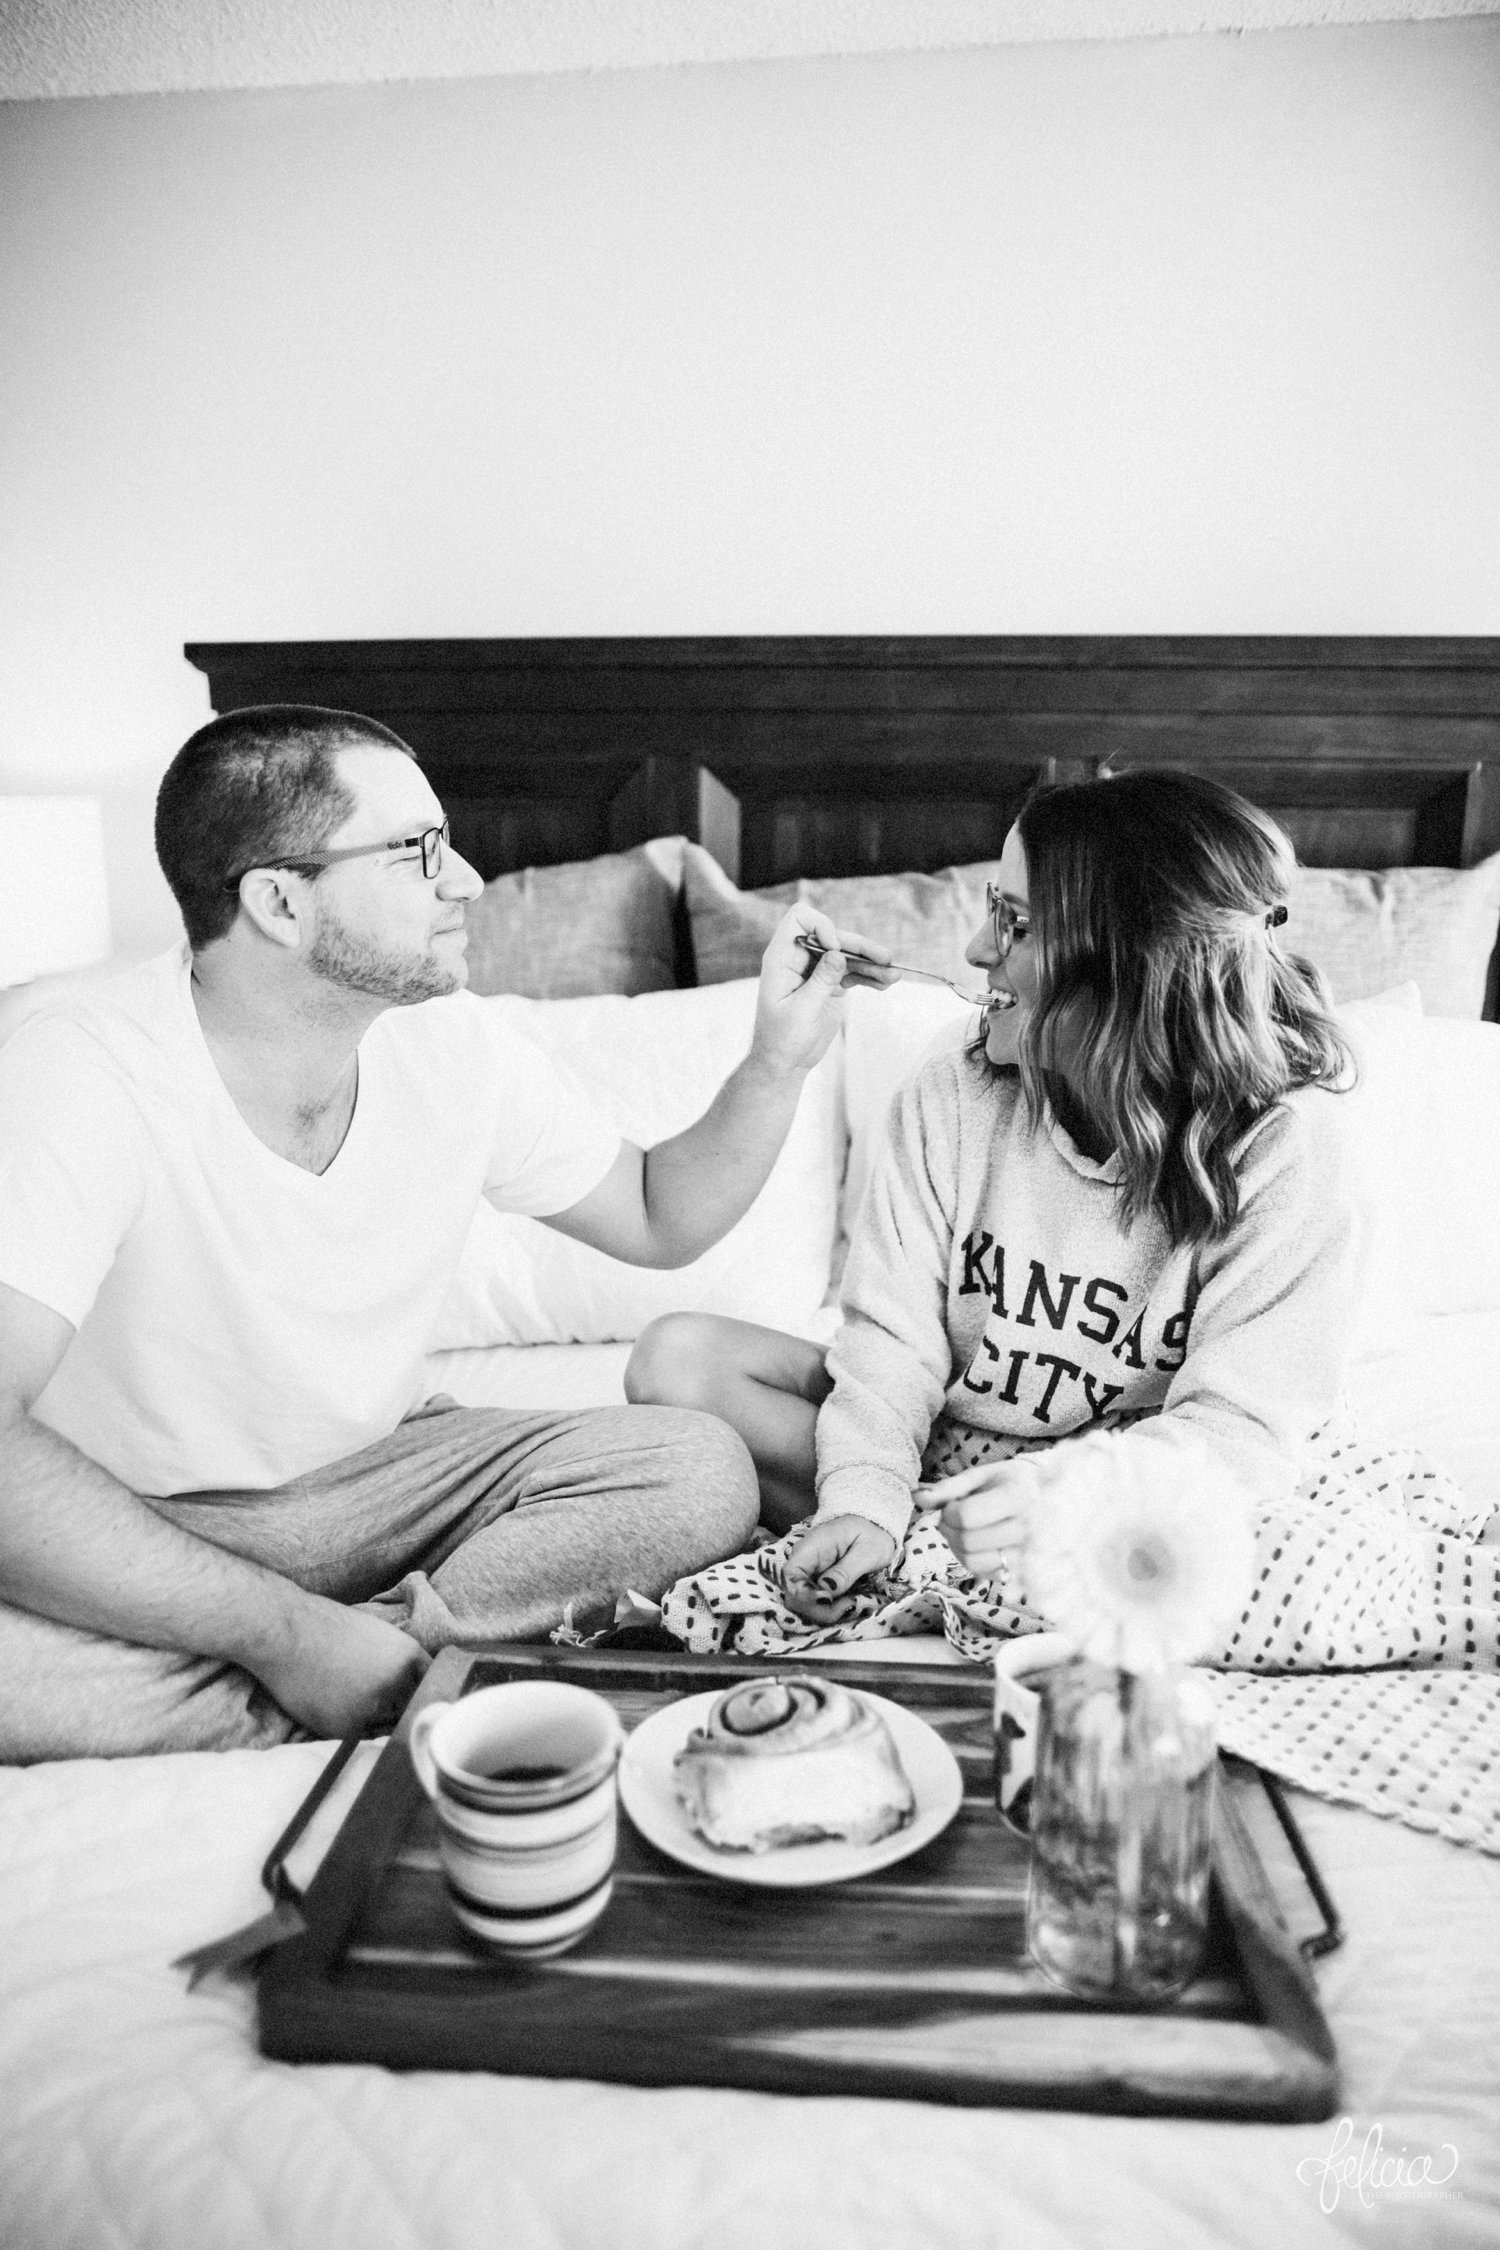 images by feliciathephotographer.com | destination photographer | engagement session | in home | lifestyle | kansas city | cozy | breakfast in bed | snuggles | golden retriever | casual | fuzzy socks | laughter | jammies | kiss | black and white | cinnamon bun | corner cafe | flower | coffee | 